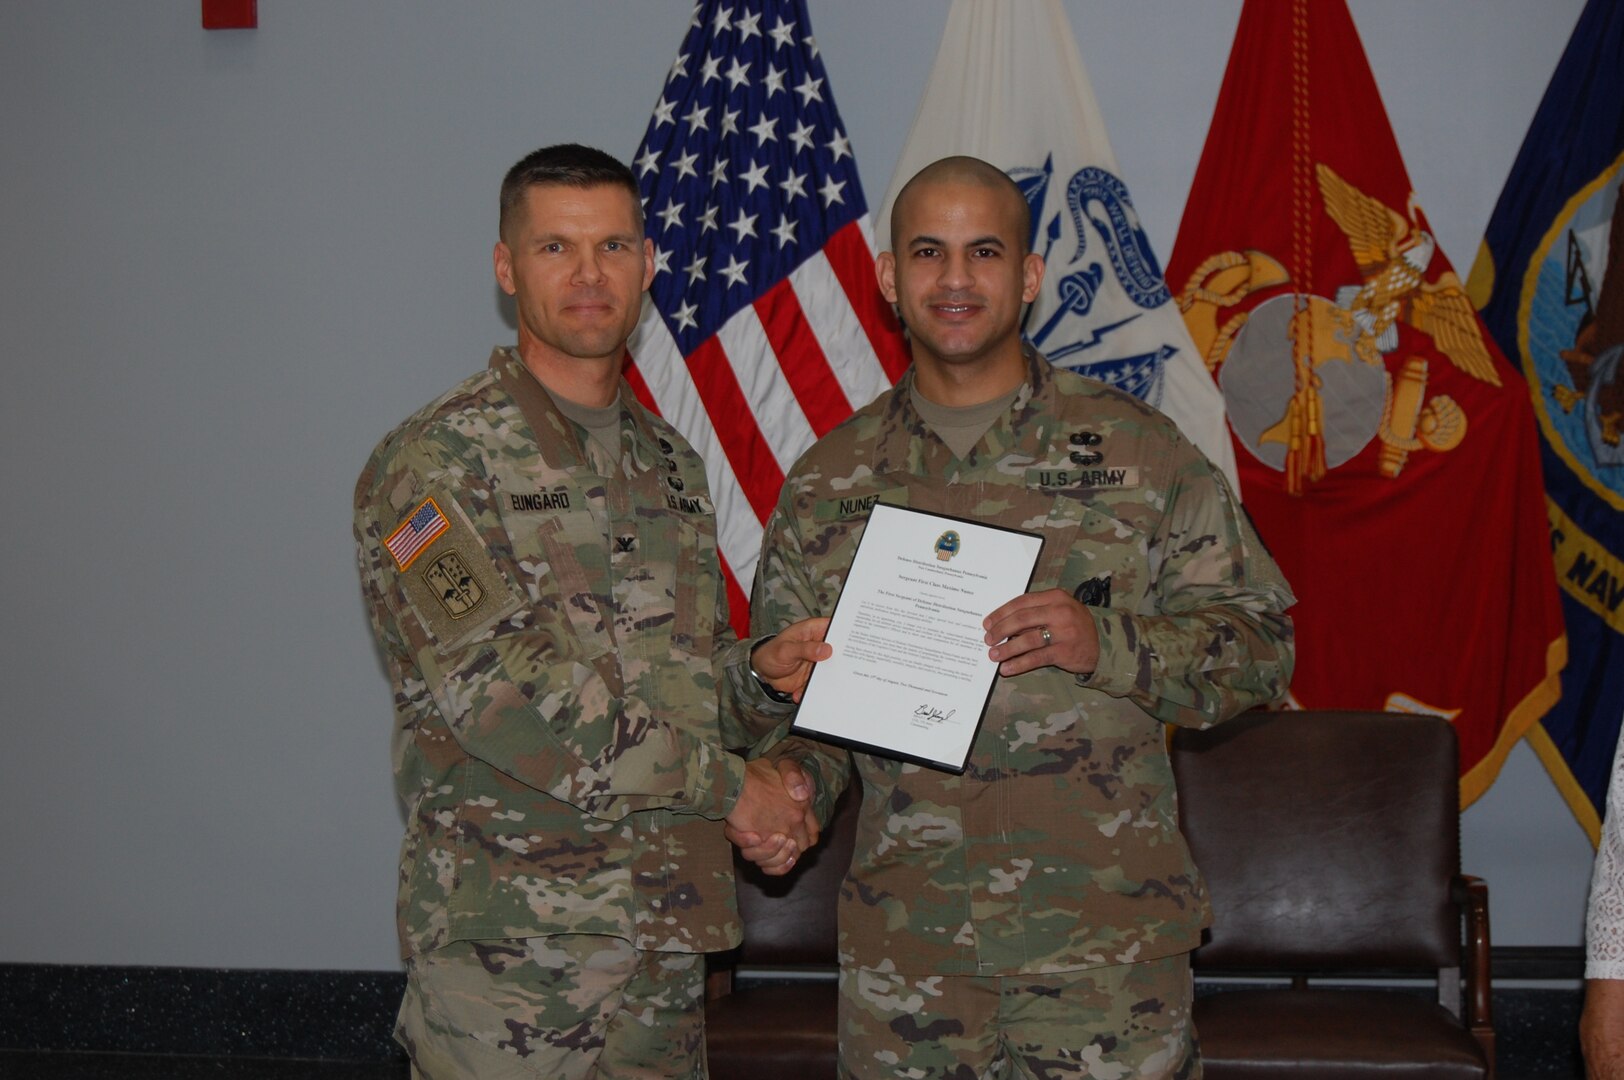 U.S. Army Col. Brad J. Eungard, commander of Defense Logistics Agency (DLA) Distribution Susquehanna, Pa., hands the formal certificate of promotion to U.S. Army 1st Sgt. Maximo Nunez after Nunez assumed responsibility as DLA Distribution, Susquehanna, Pa. Installation Senior Enlisted Advisor and 1st Sgt. during a ceremony held August 15, 2017 at the DLA Distribution Center, Susquehanna, Pa.